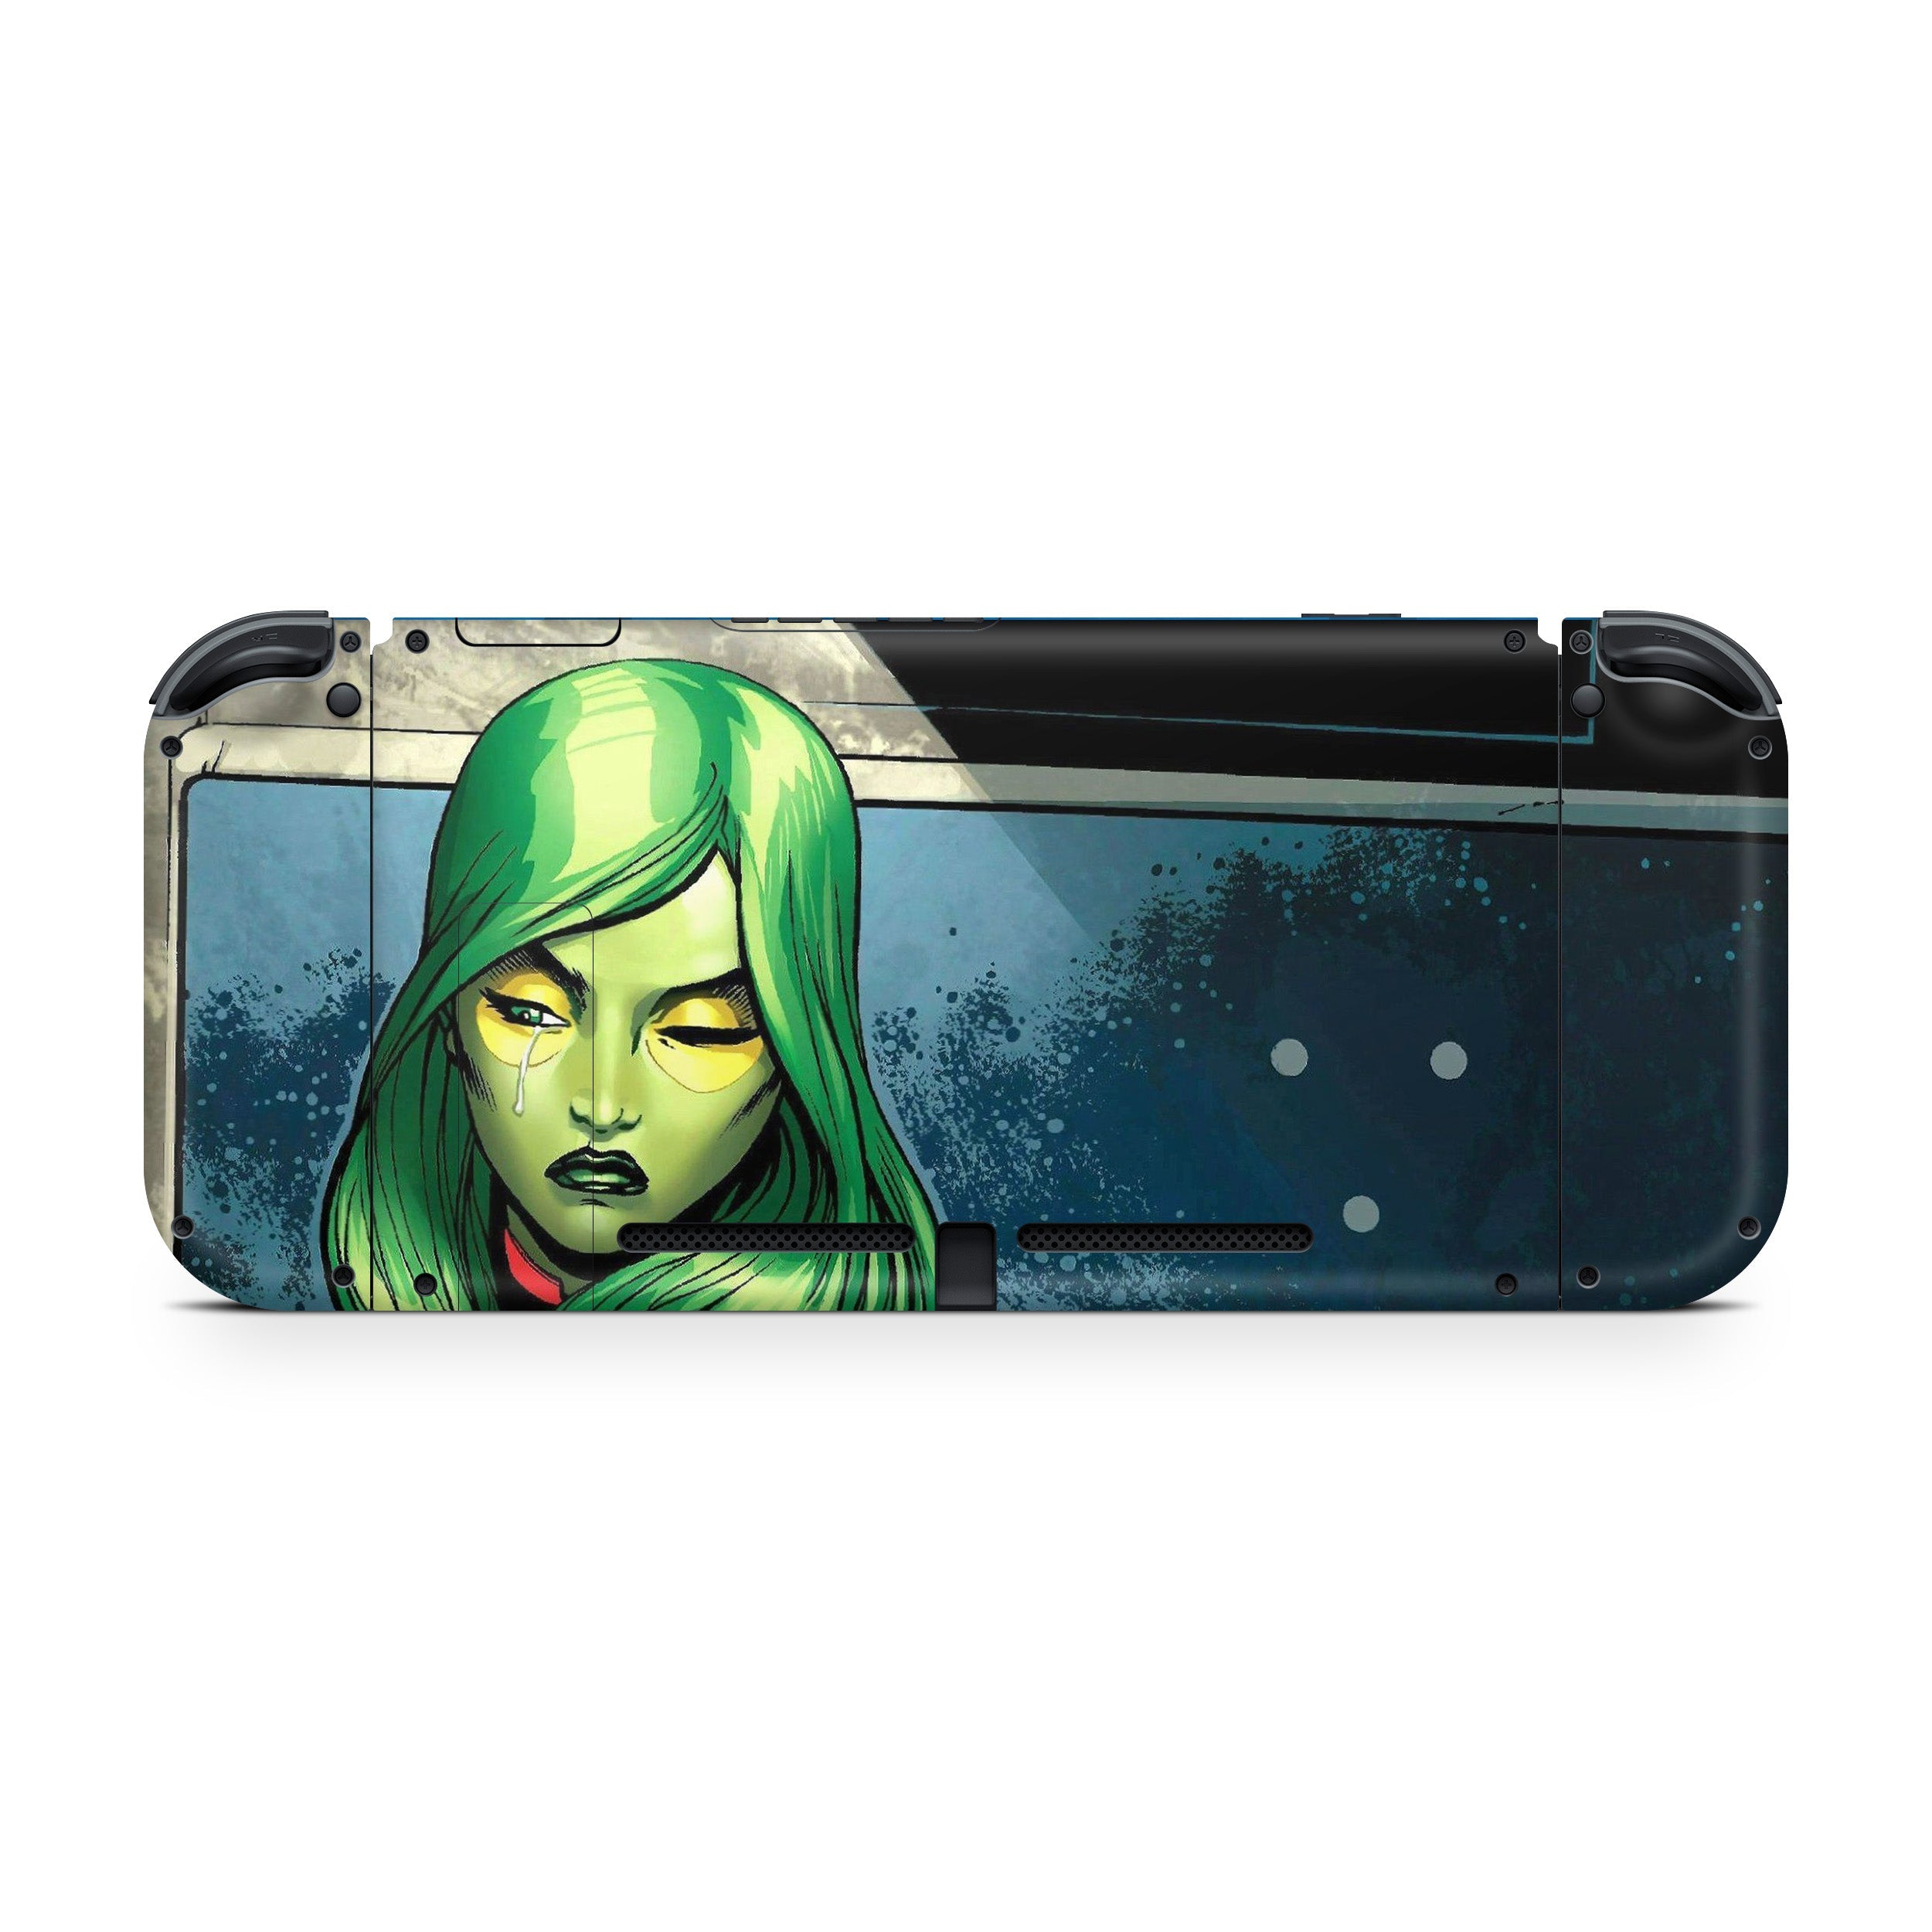 A video game skin featuring a Marvel Guardians of the Galaxy Gamora design for the Nintendo Switch.